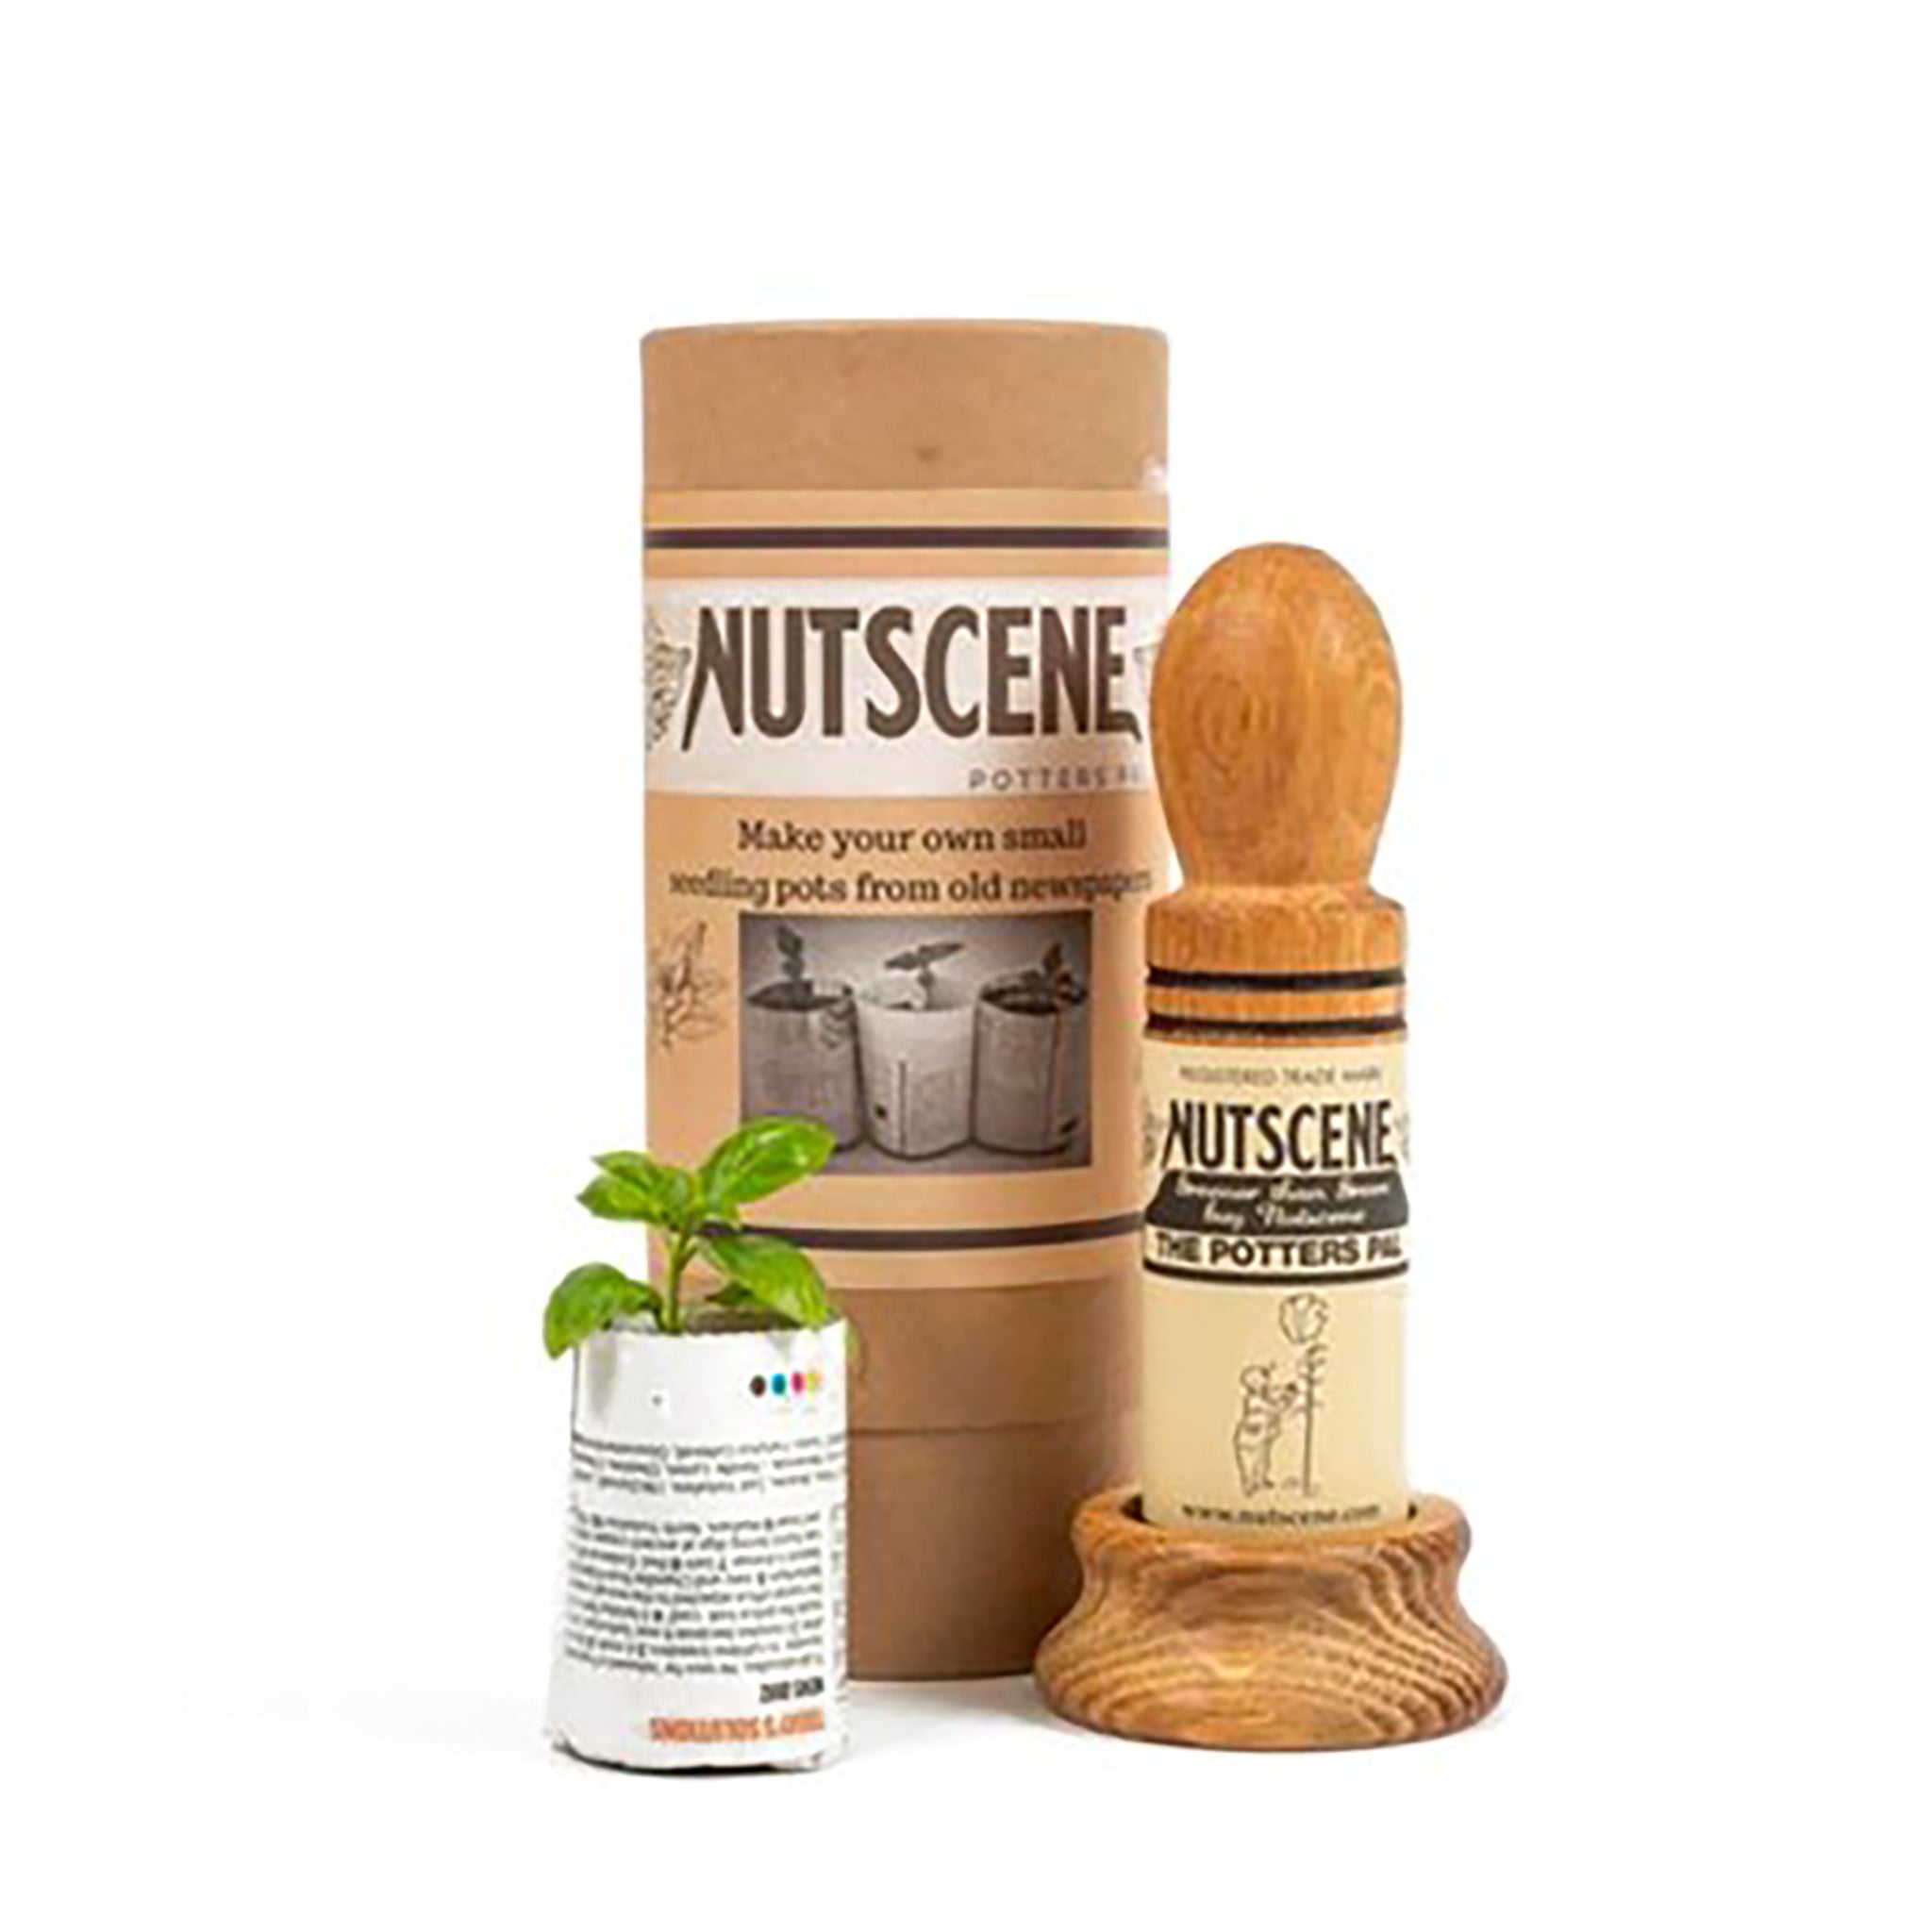 Nutscene potters pal kit with cardboard display tube, next to a seedling placed in a newspaper seedling pot